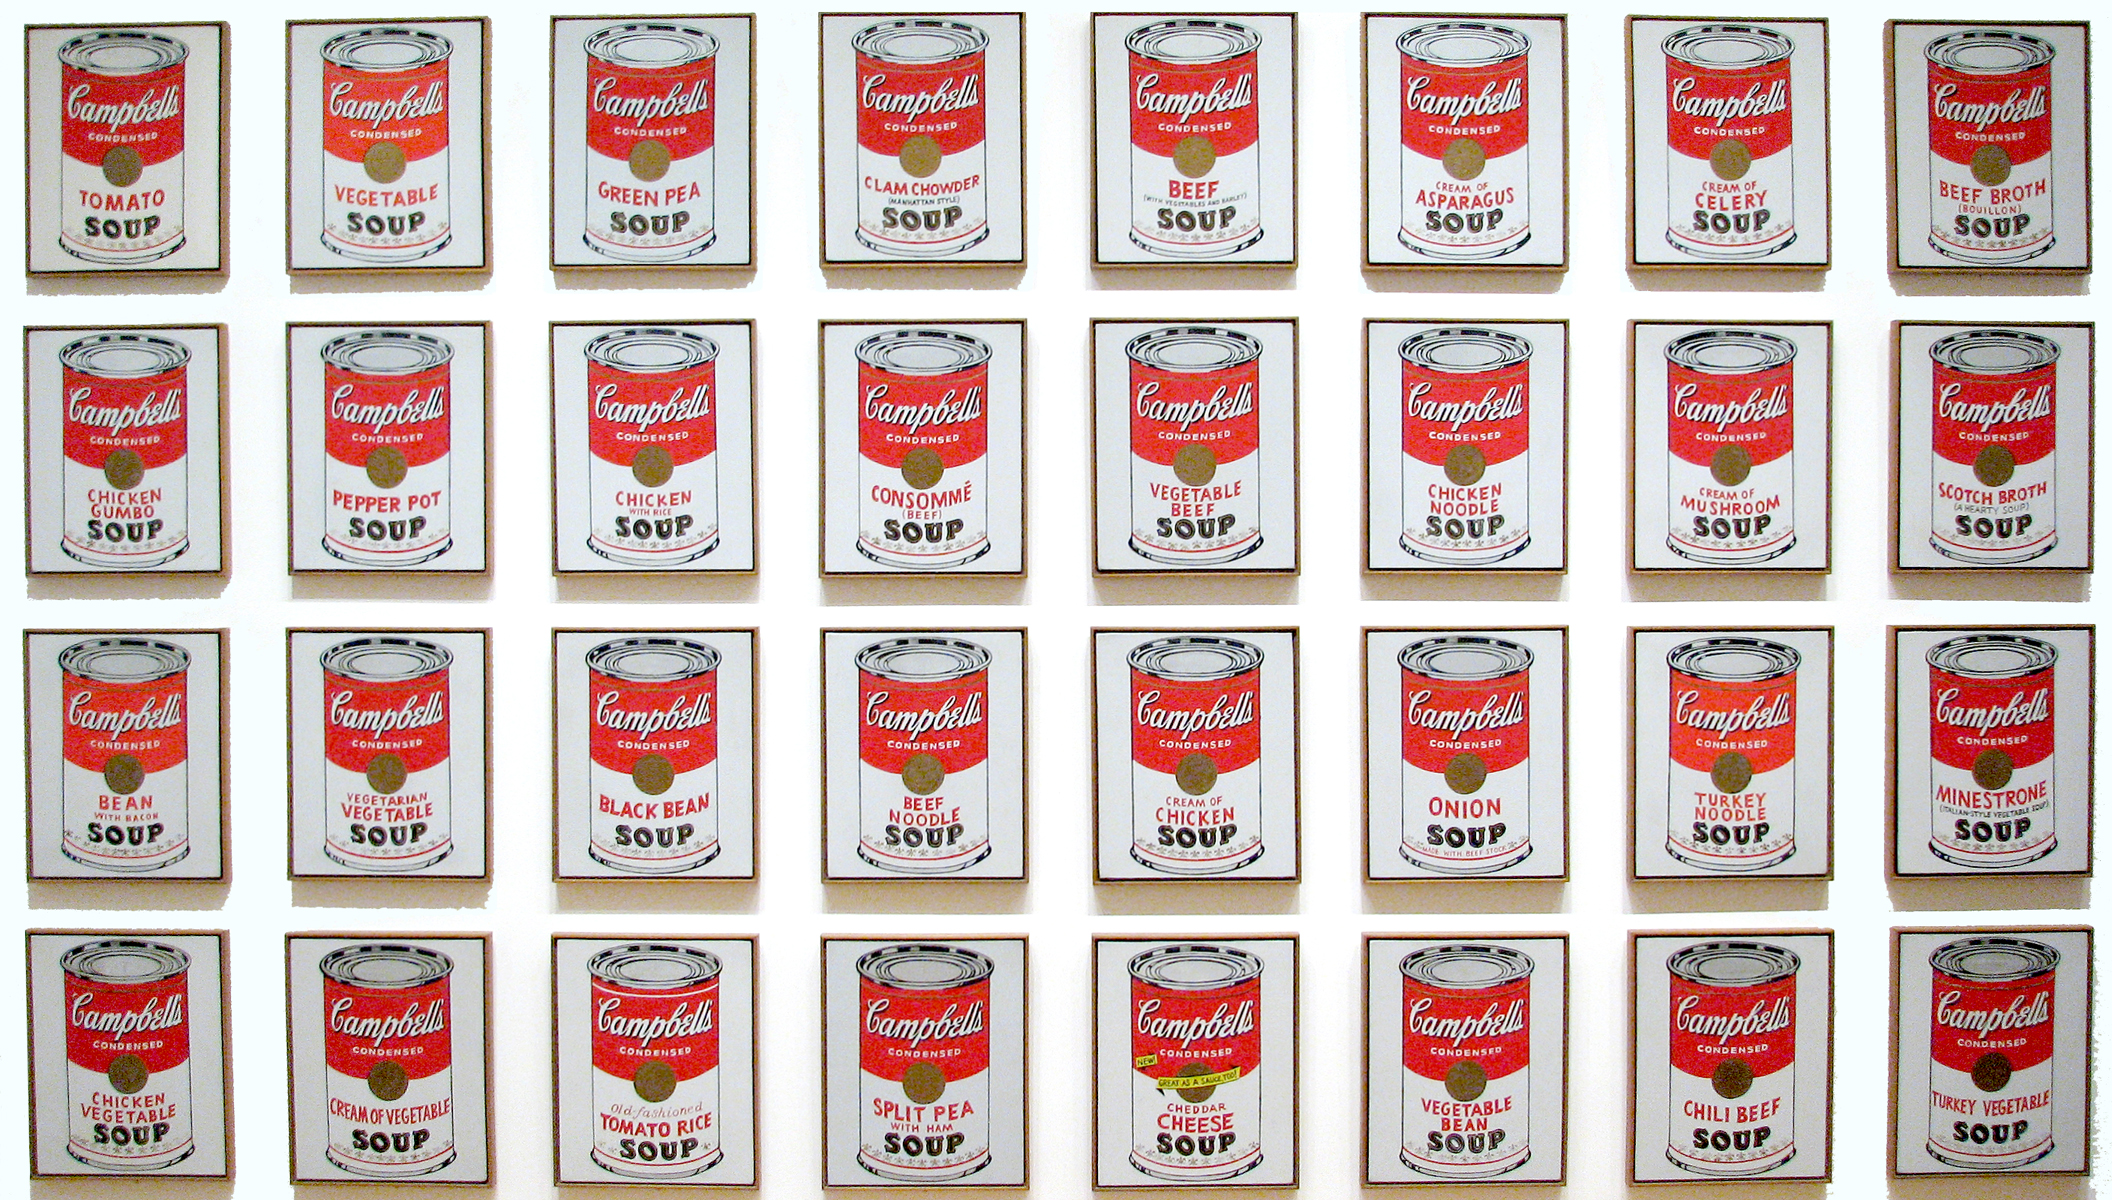 campbells_soup_cans_moma1.jpg